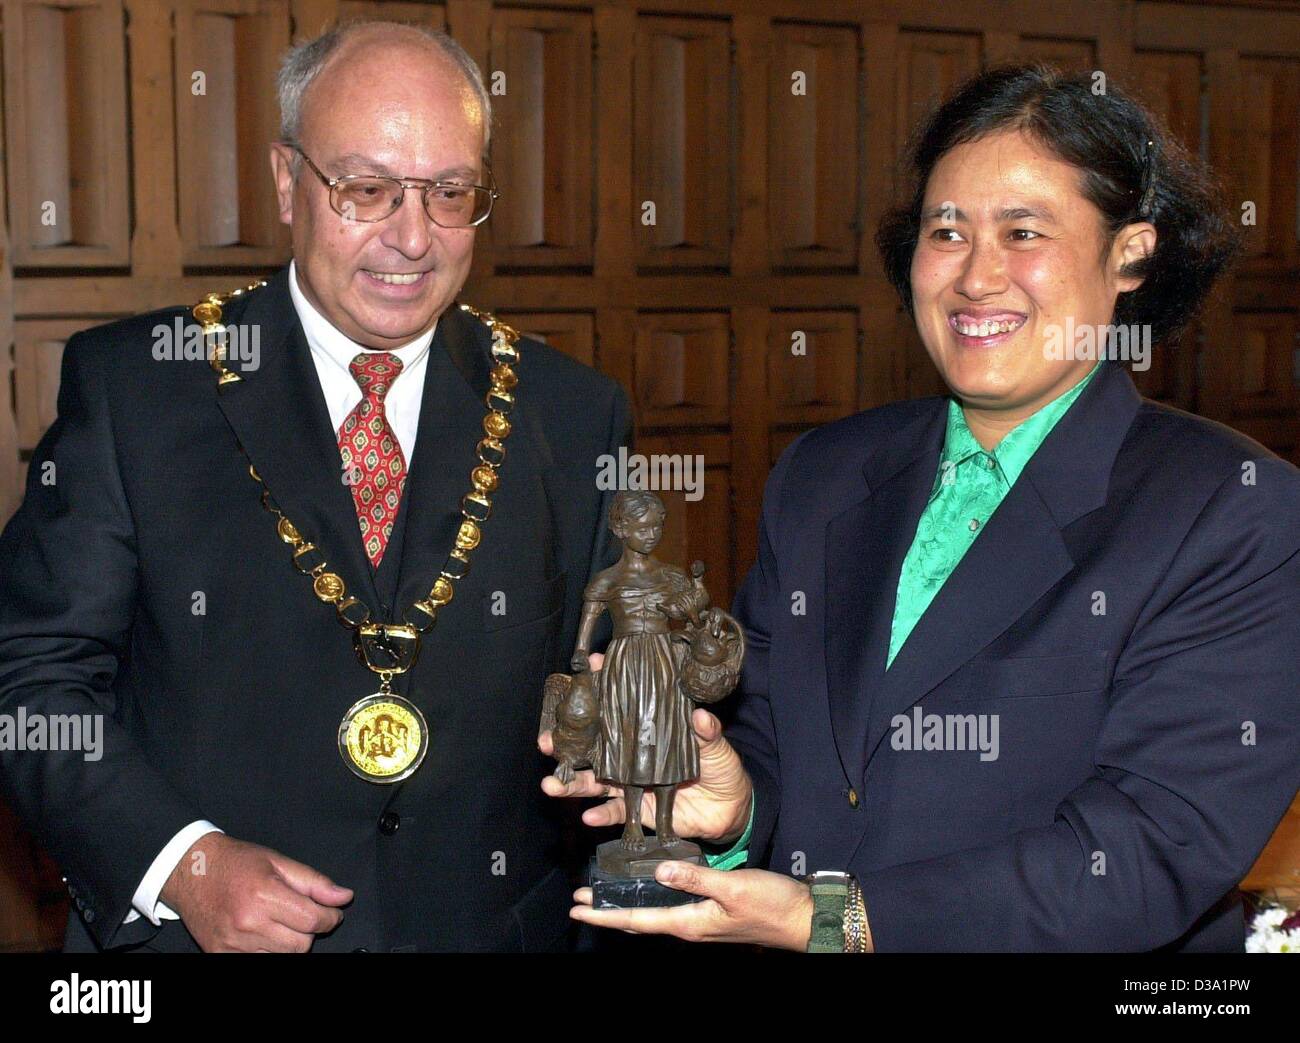 (dpa) - The Thai crown princess Maha Chakri Sirindhorn (R) is welcomed by mayor Juergen Danielowski (L) in the town hall of Goettingen, Germany, 26 February 2002. In her hand she is holding a present by the mayor, a Gaenseliesel statuette ('geese-keeping Lisa' being a traditional figure and the town Stock Photo